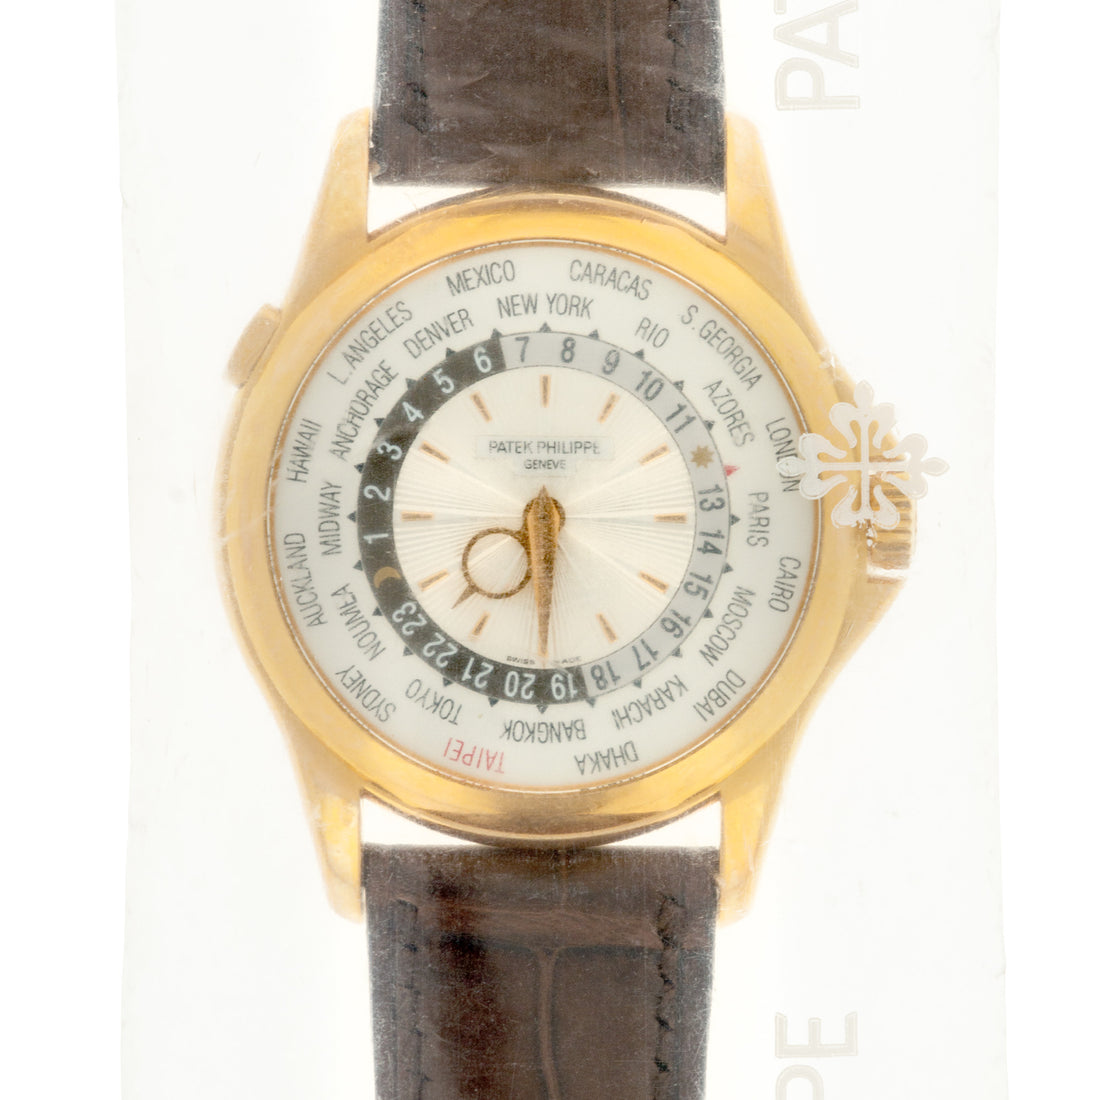 Patek Philippe Rose Gold World Time Ref. 5130R, Limited Taipei Edition